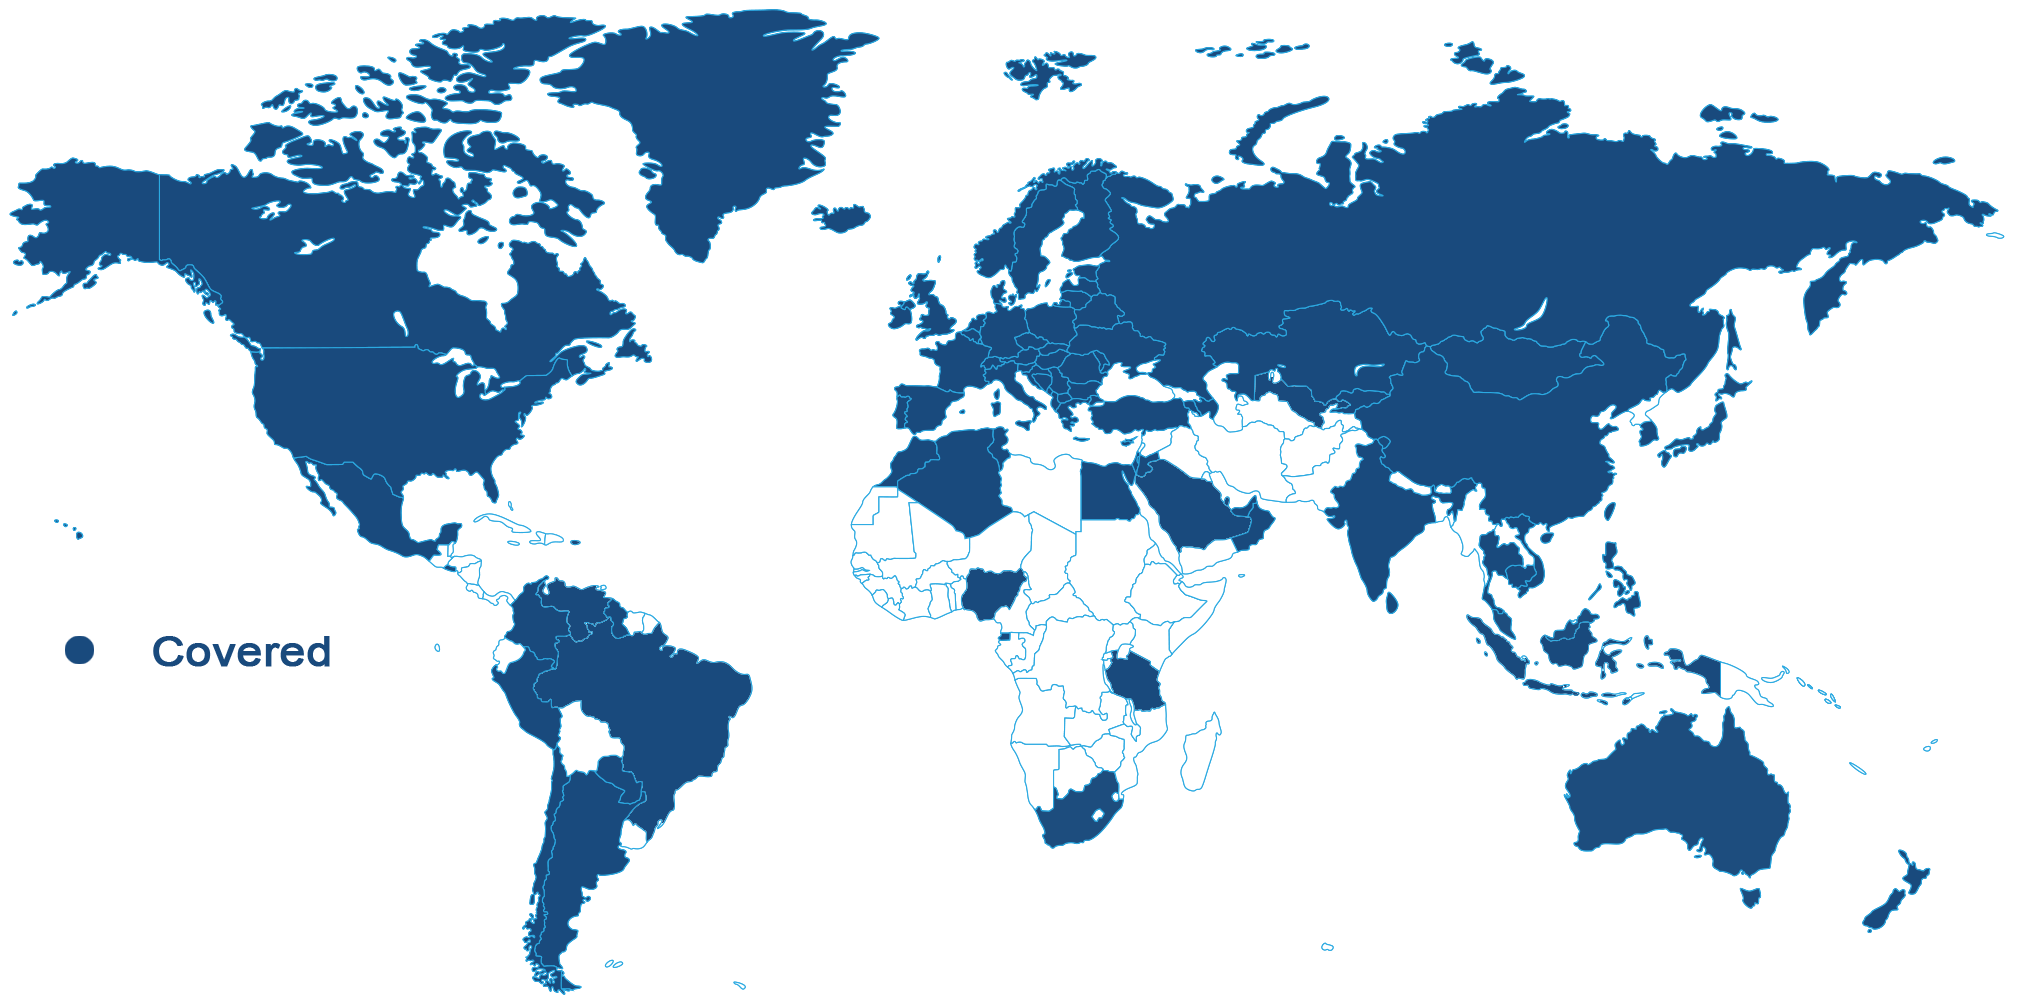 Coverage Map of all Countries and Regions with 1NCE IoT Mobile Network coverage.